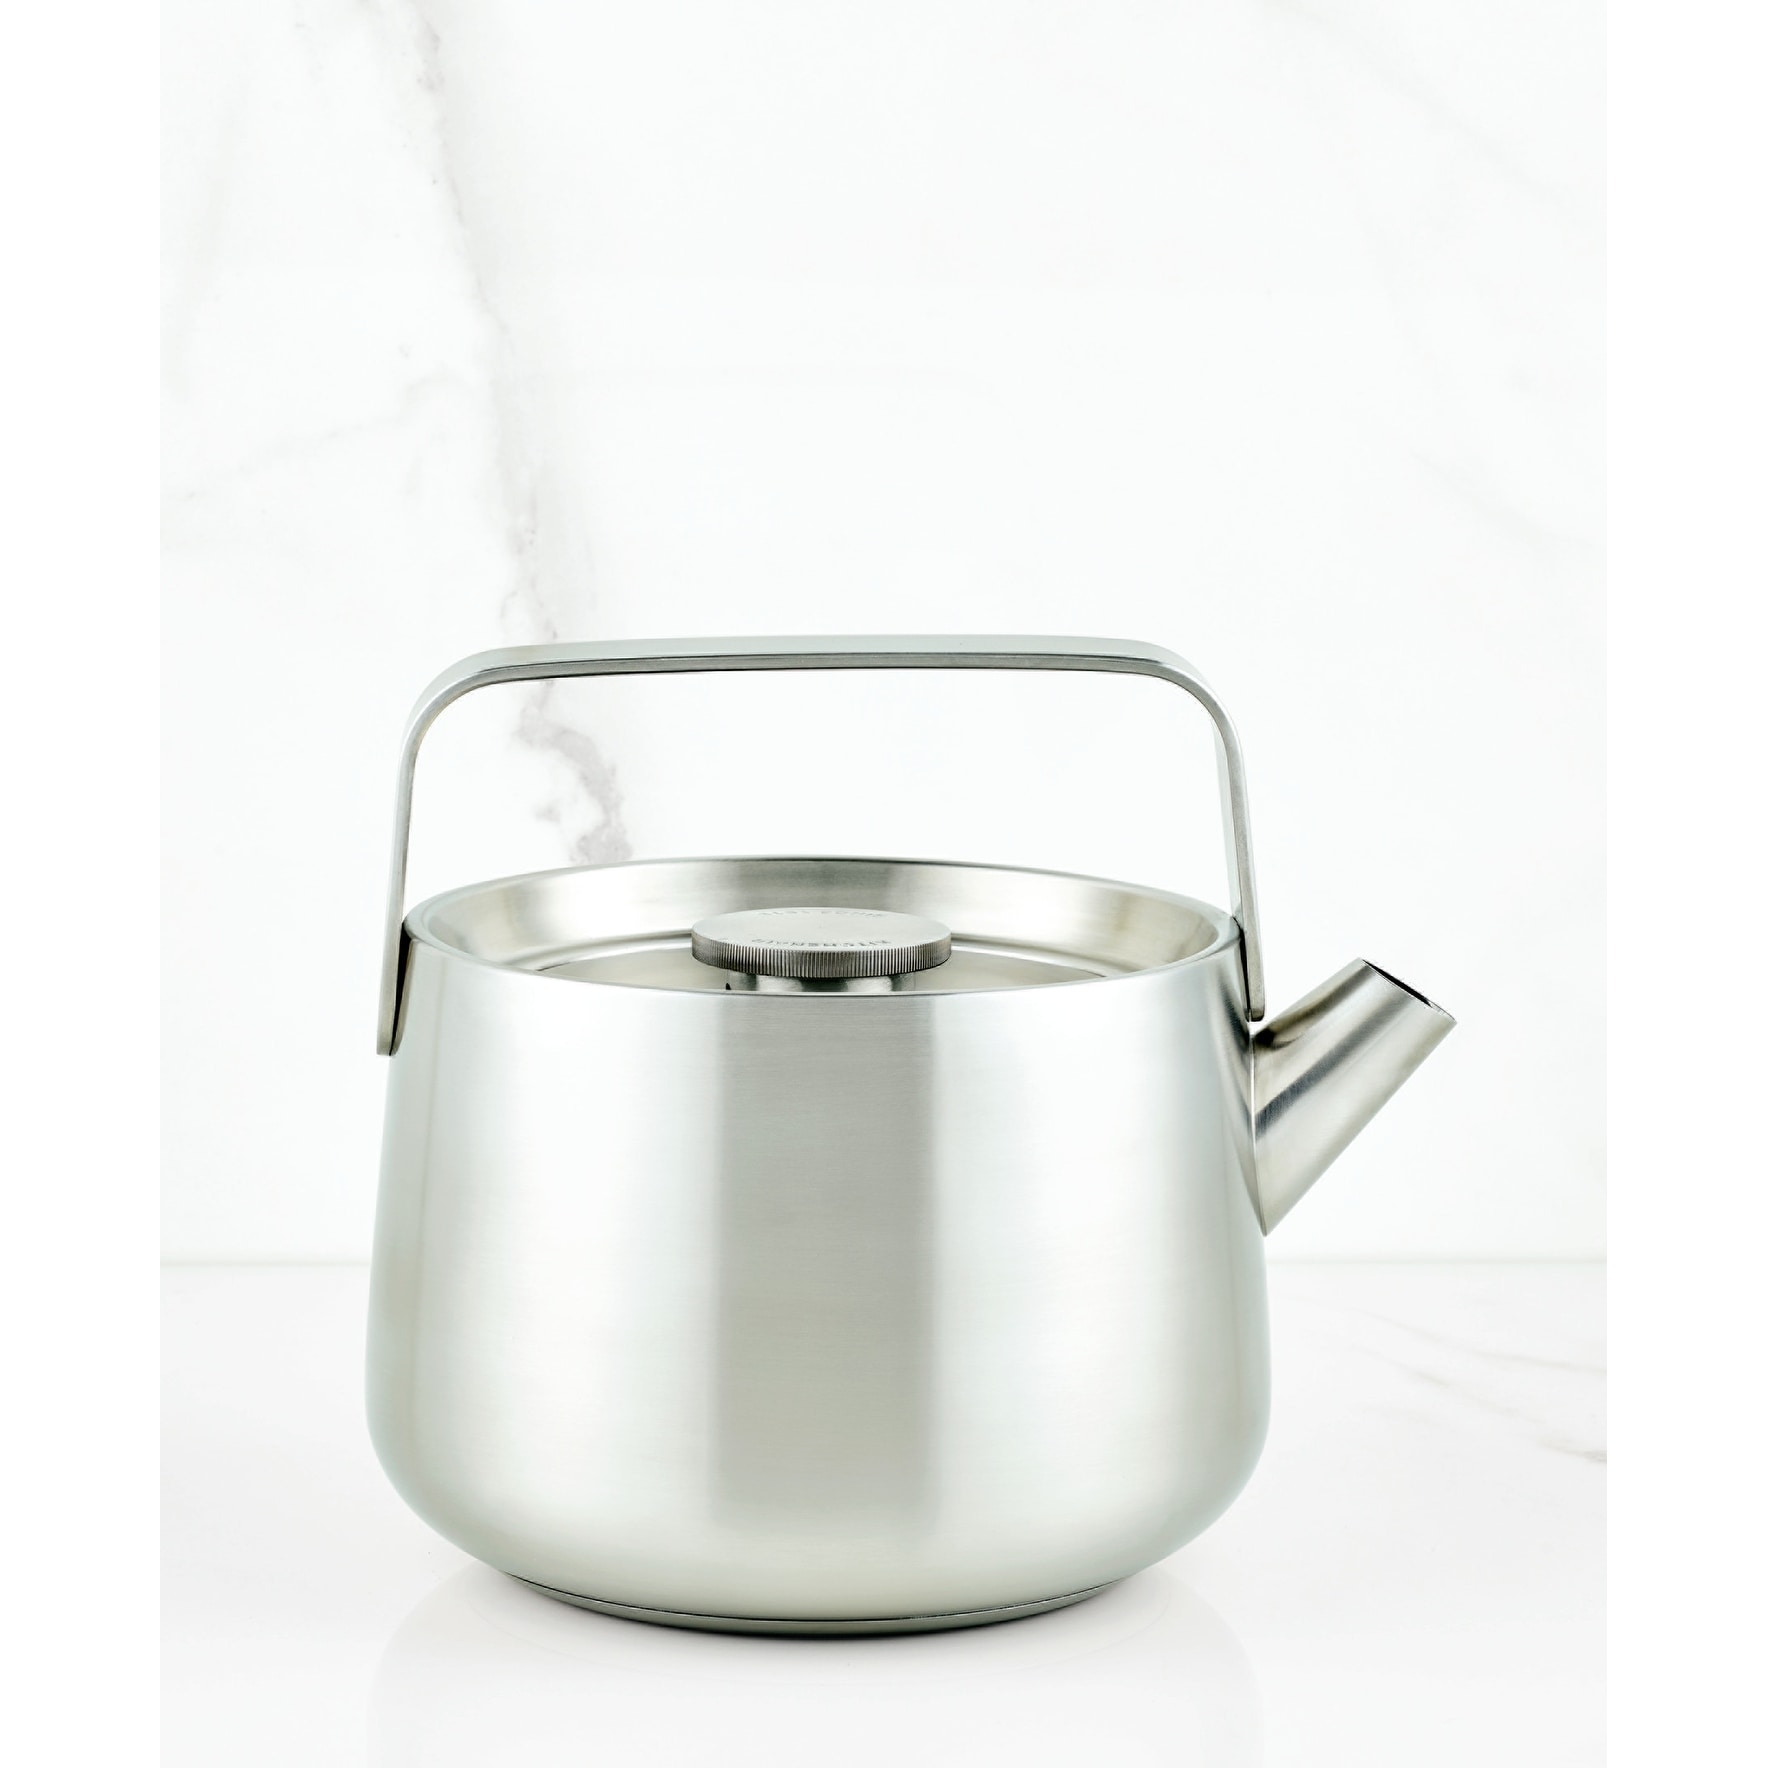 Teakettle for Induction Cooker Tea Pot with Strainer Stainless